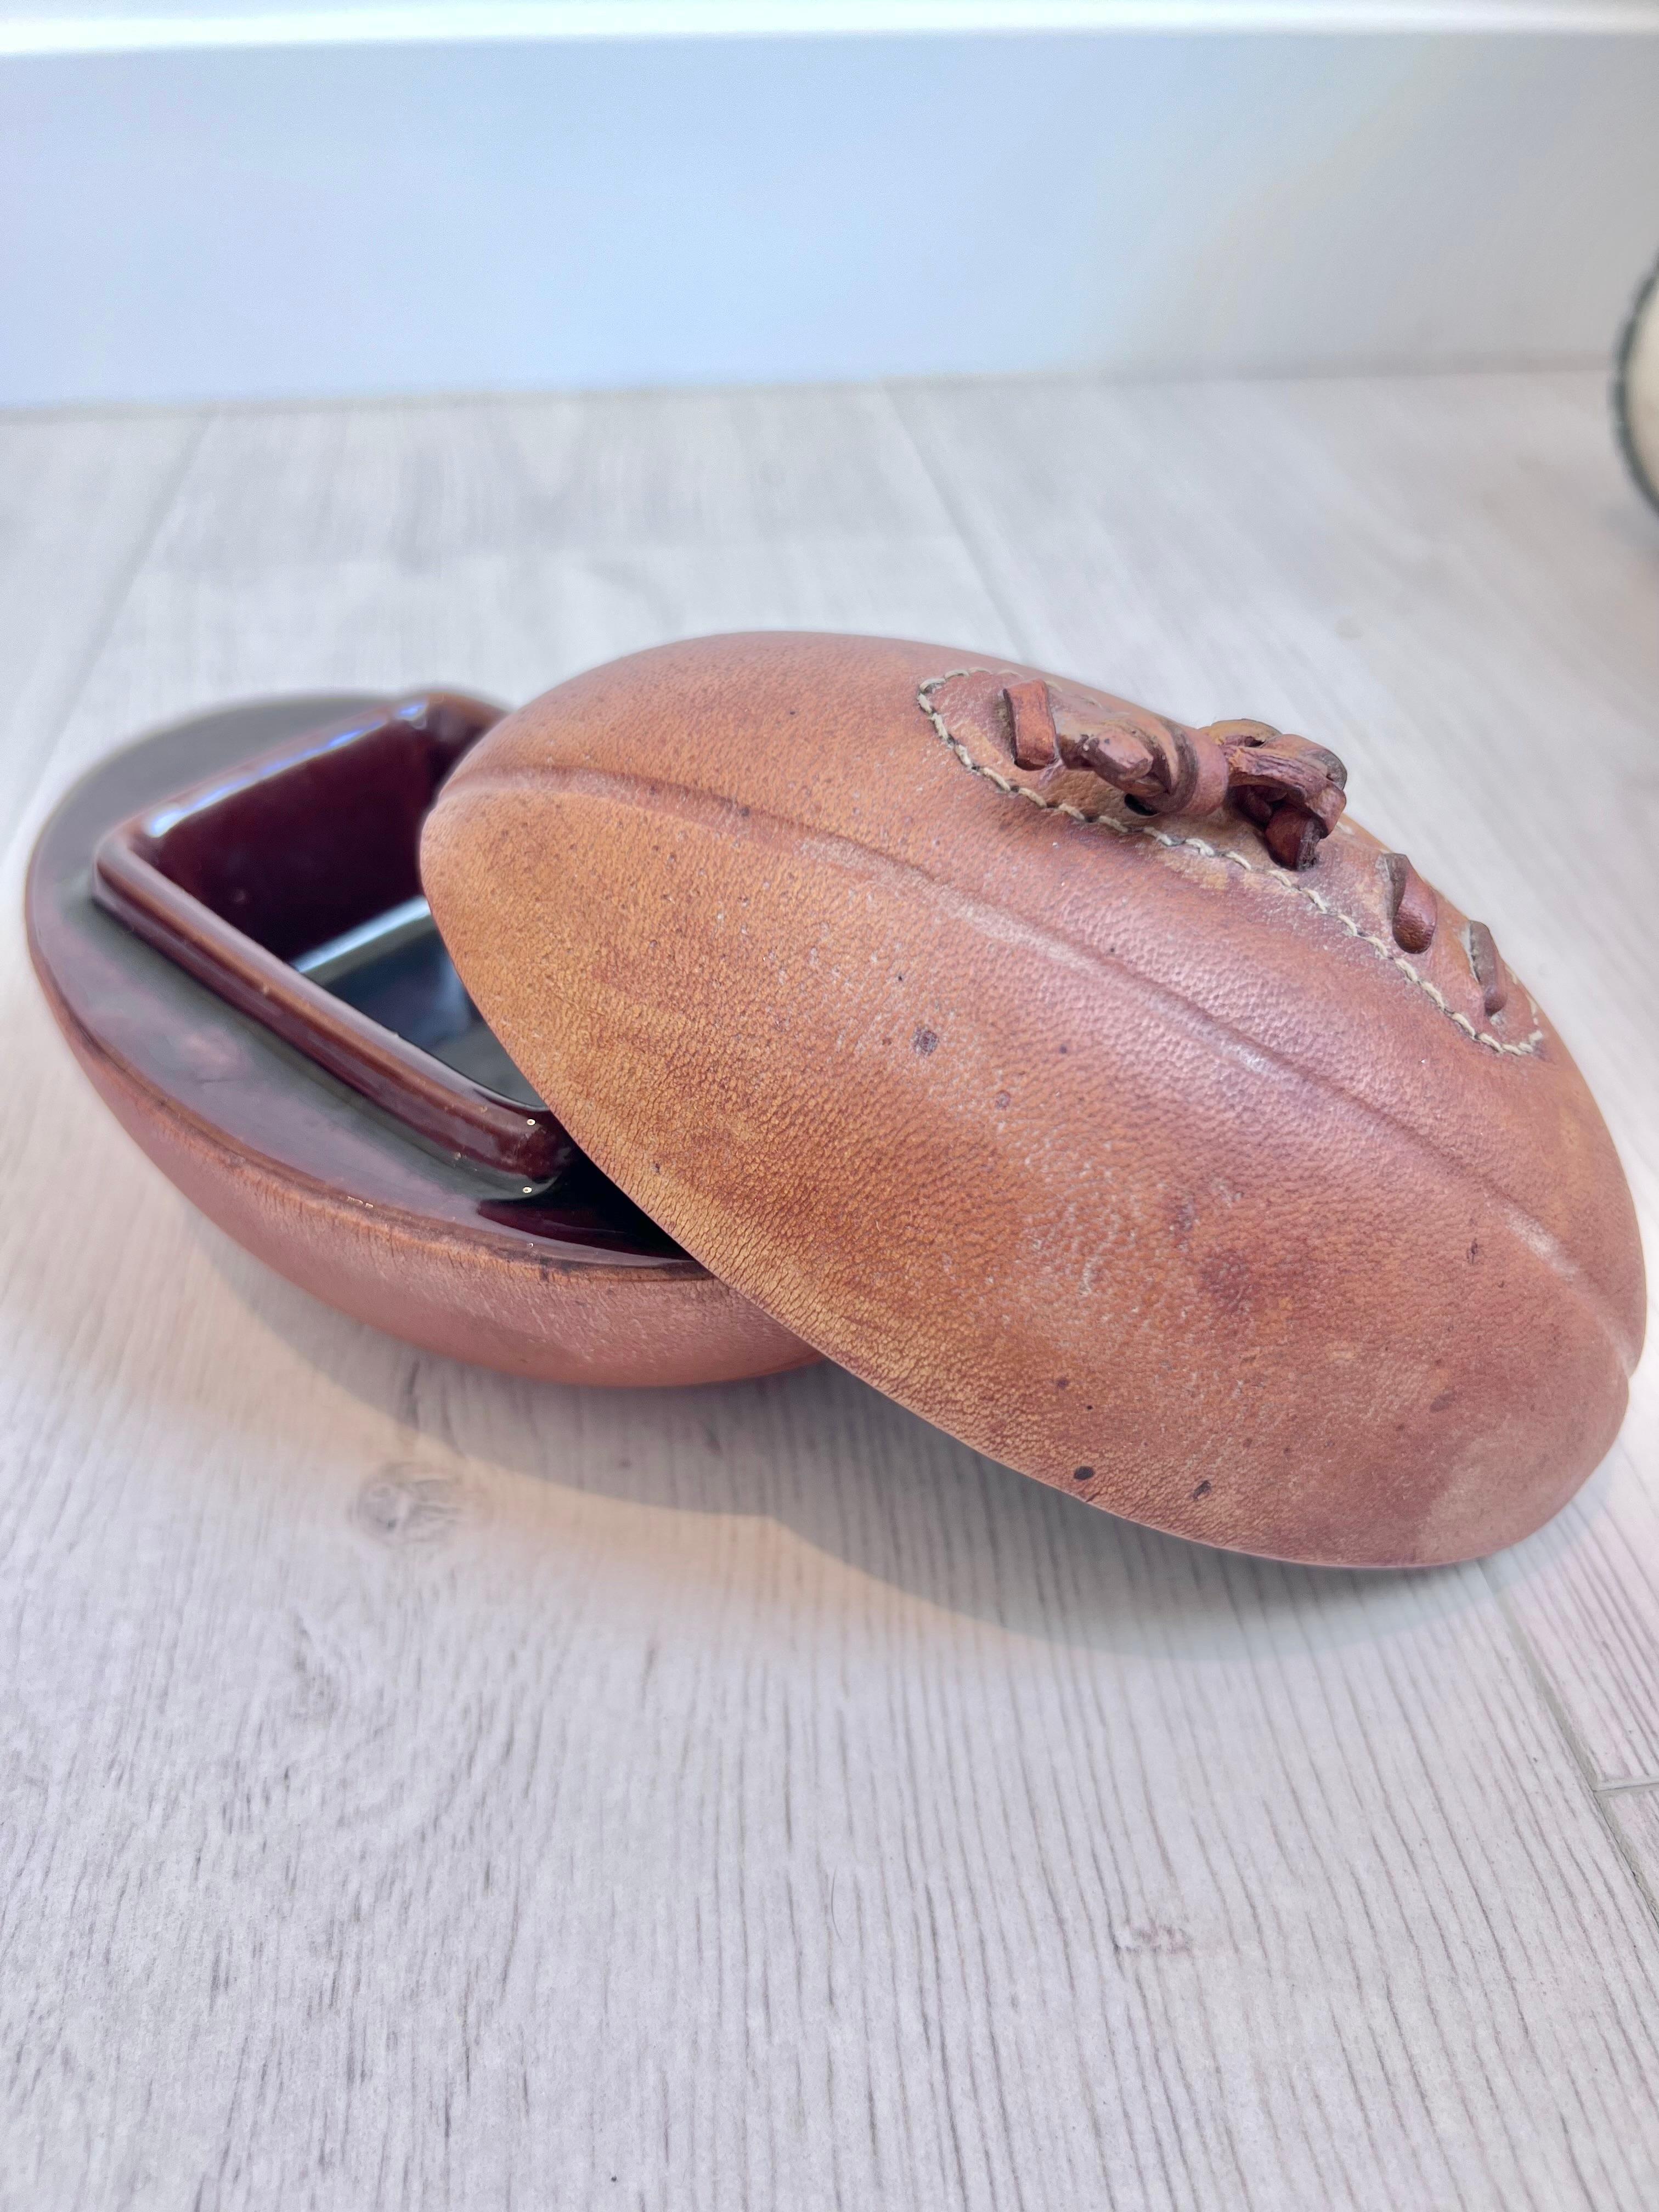 Handsome leather and ceramic ashtray/catchall by Longchamp in the design of an old football. Stamped with Lonchamp - France on the base. Beautiful patina to brown leather. Opens up to reveal the deep brown ceramic ashtray in flawless condition.